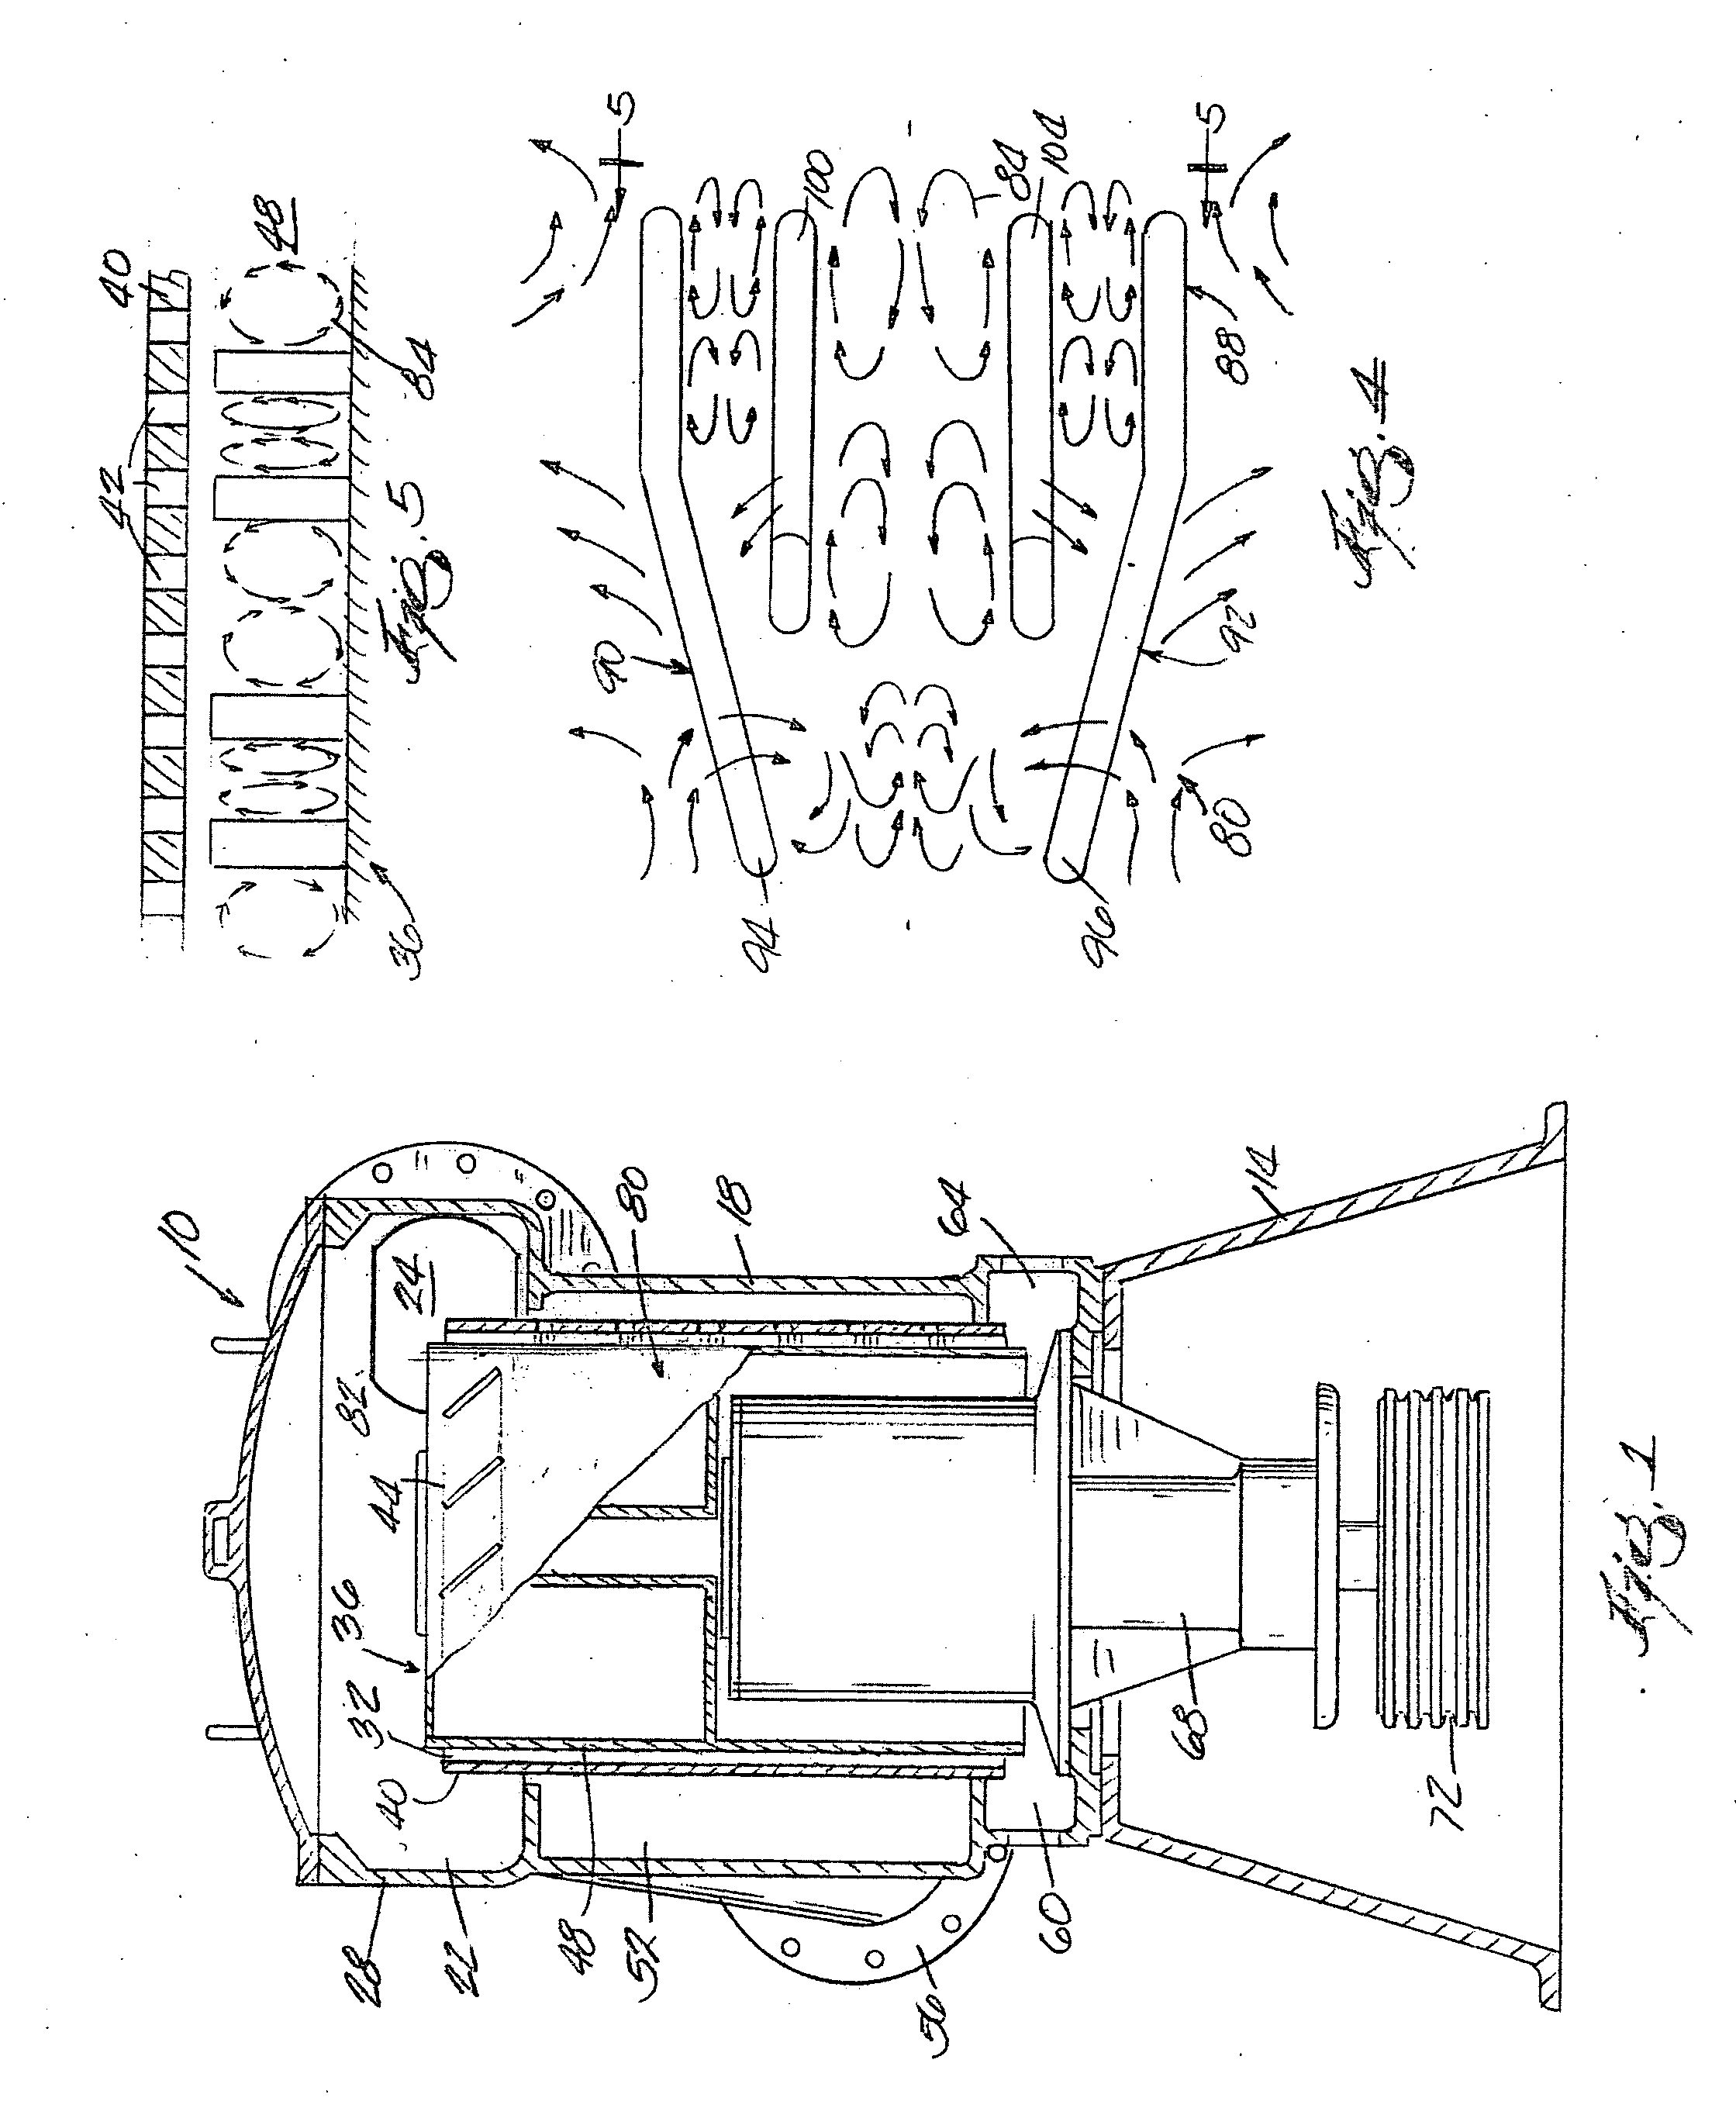 Vortex inducing rotor for screening apparatus for papermaking pulp